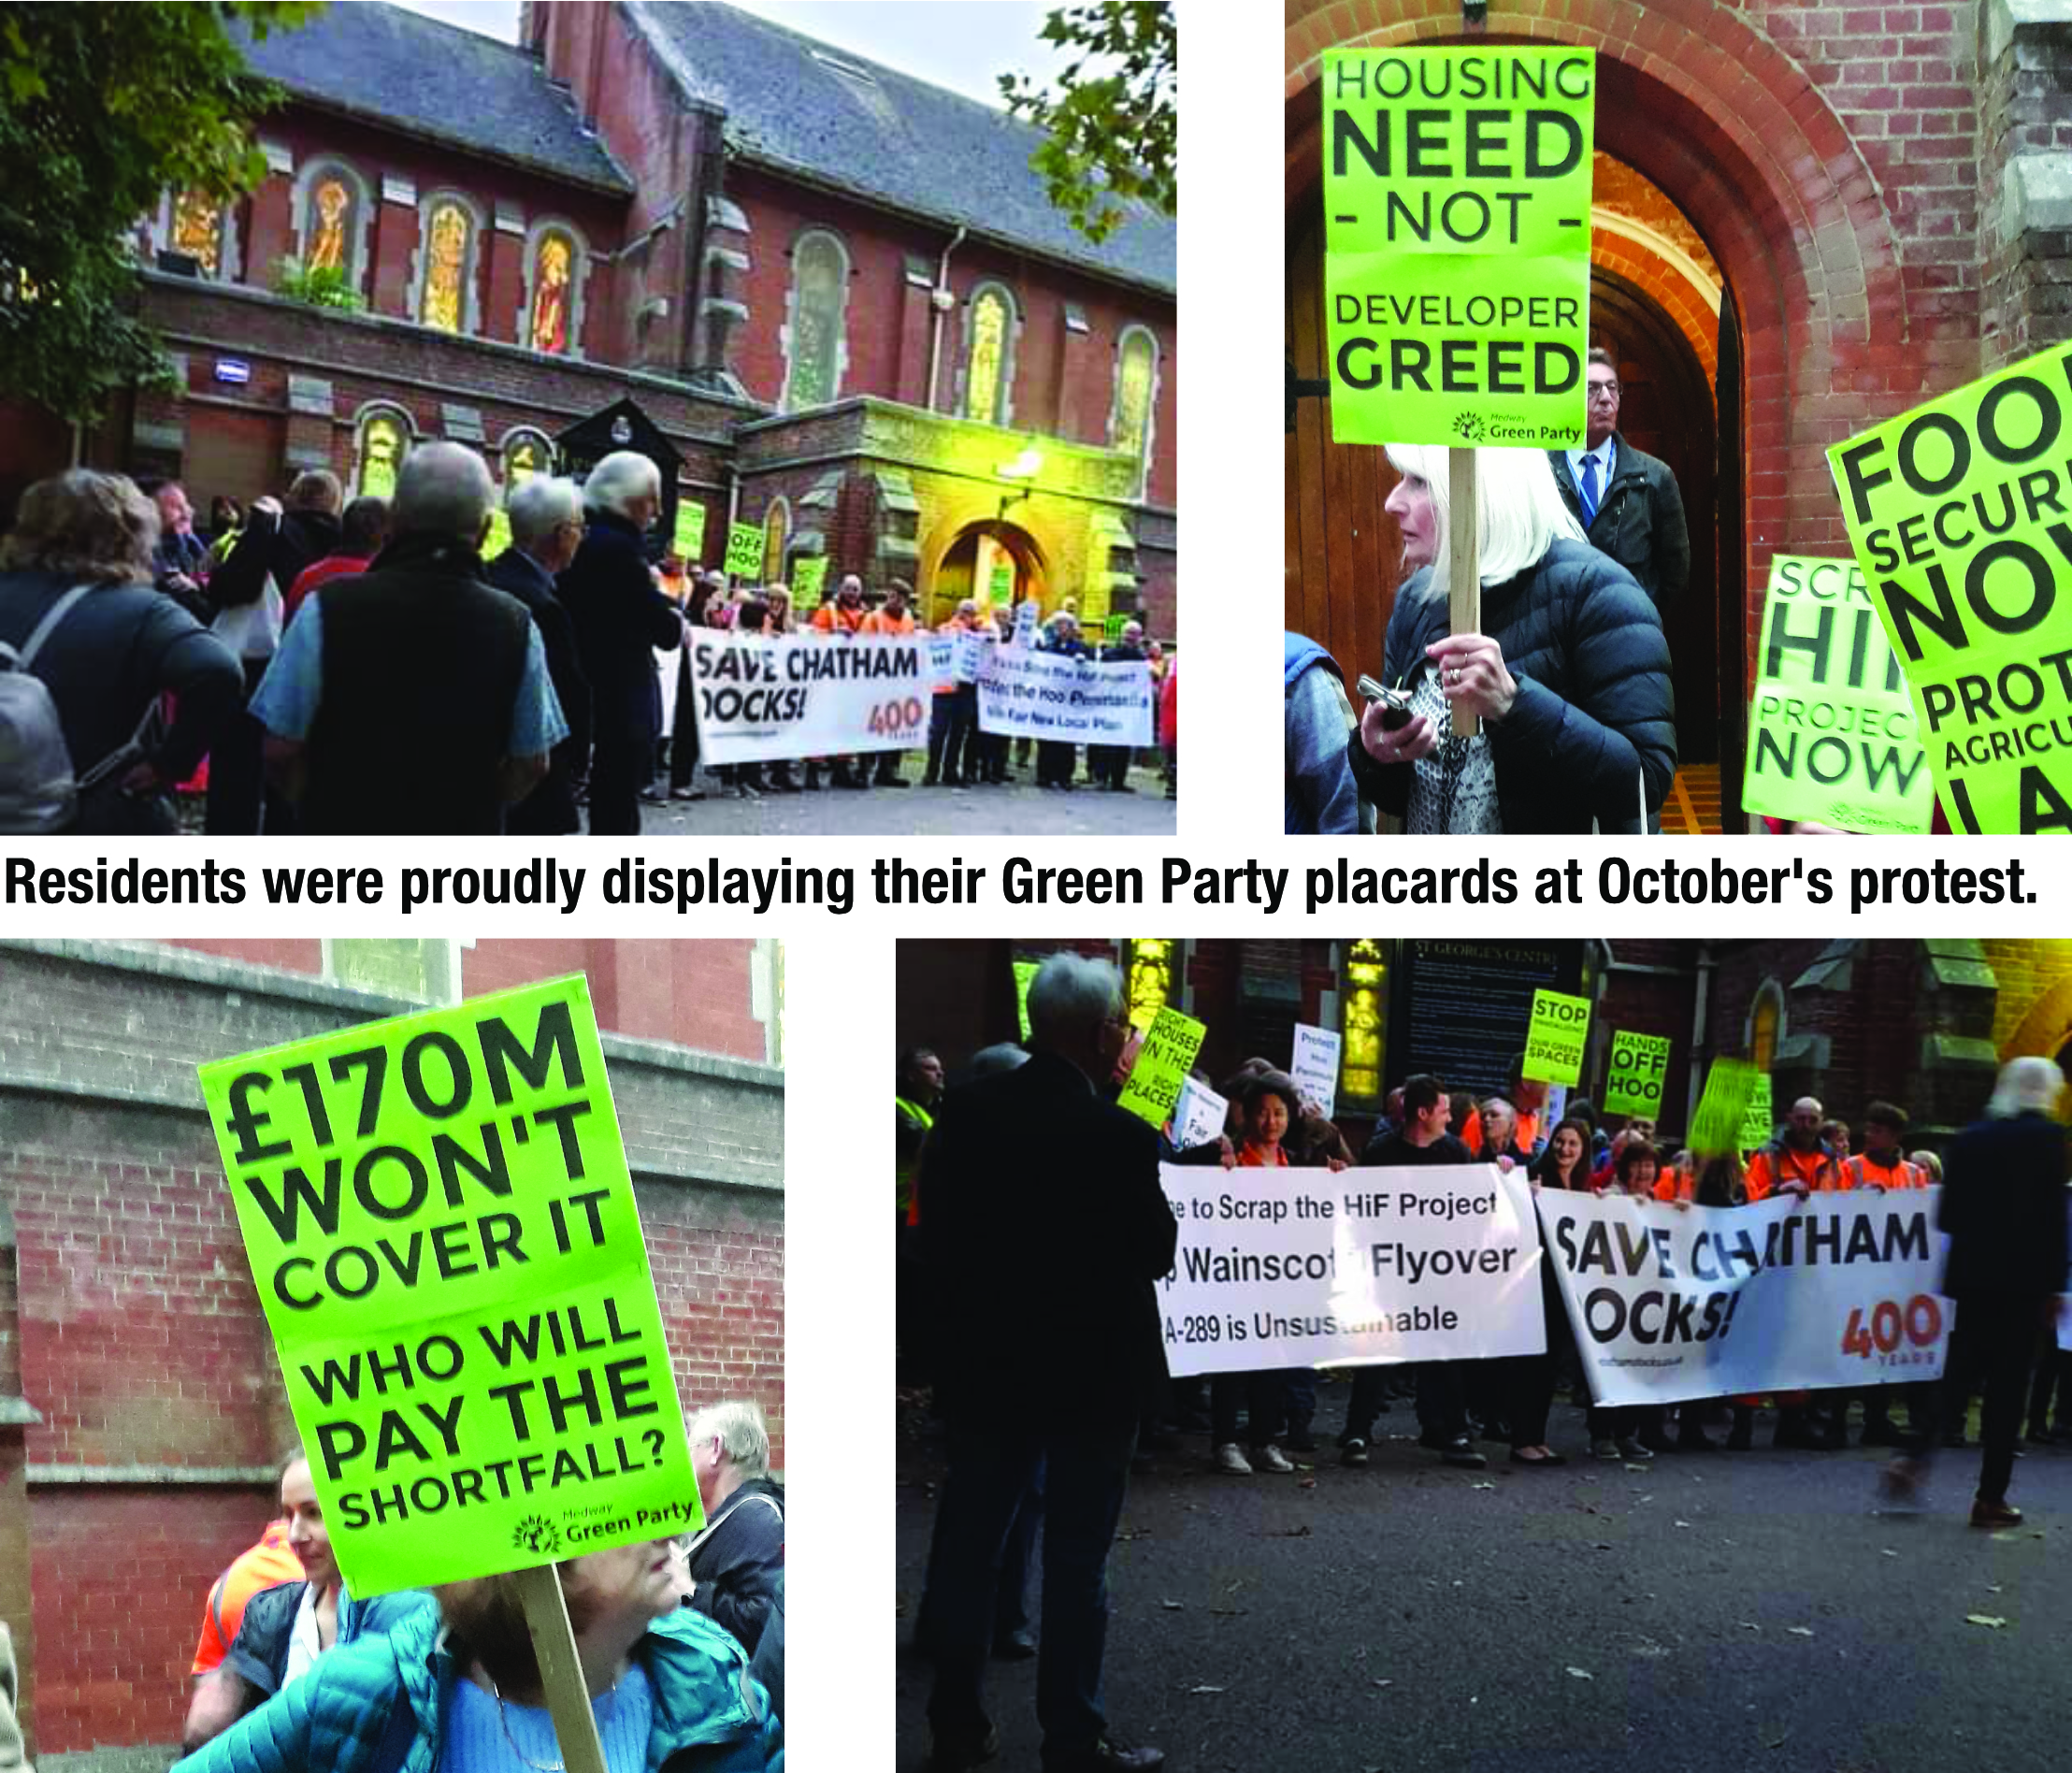 Green Party Campaigners & Residents attend protest against local plan